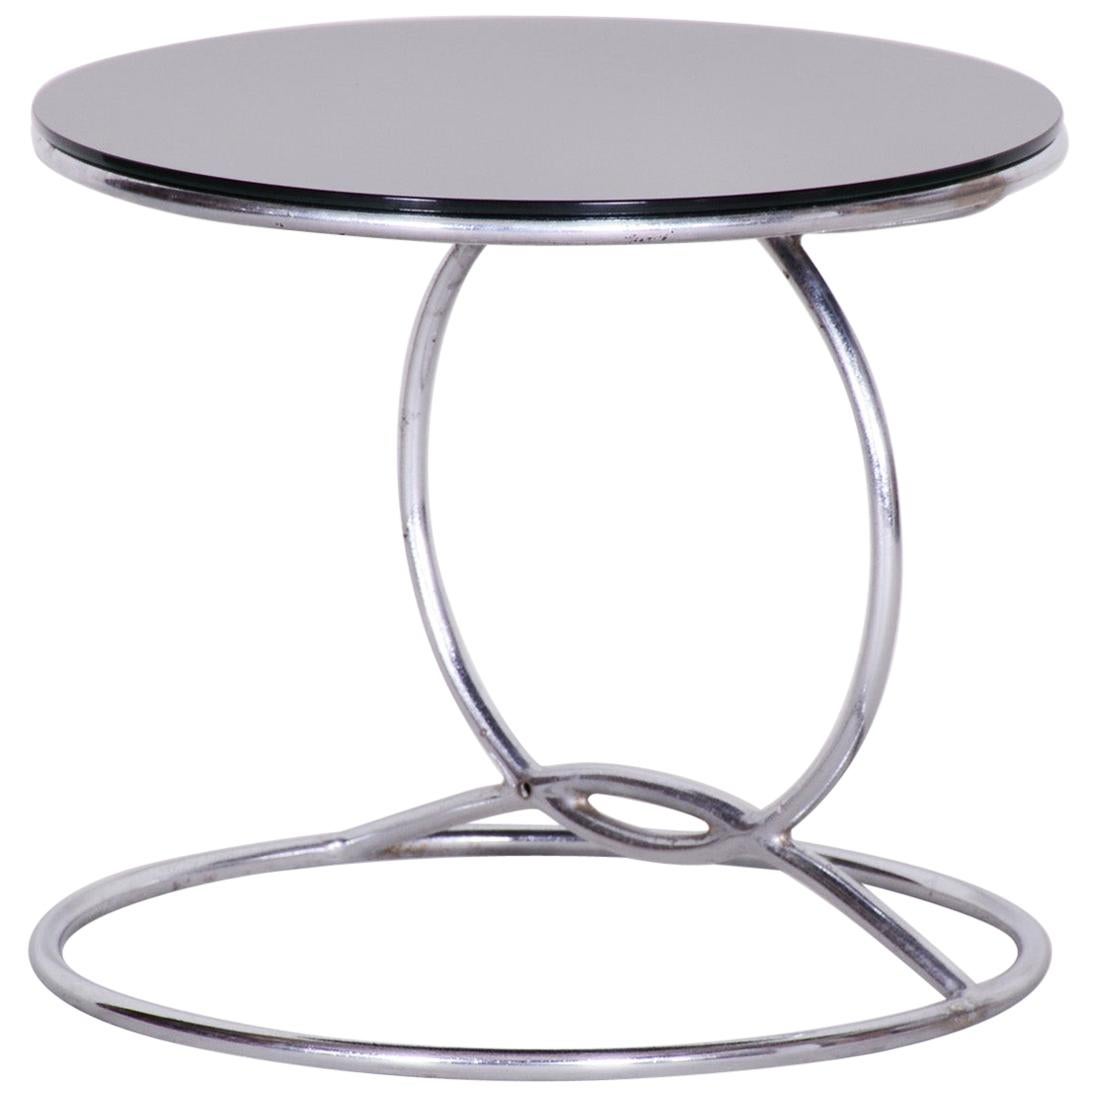 Unusual Chrome Bauhaus Round Small Table, 1950s, Perfect Condition, Black glass